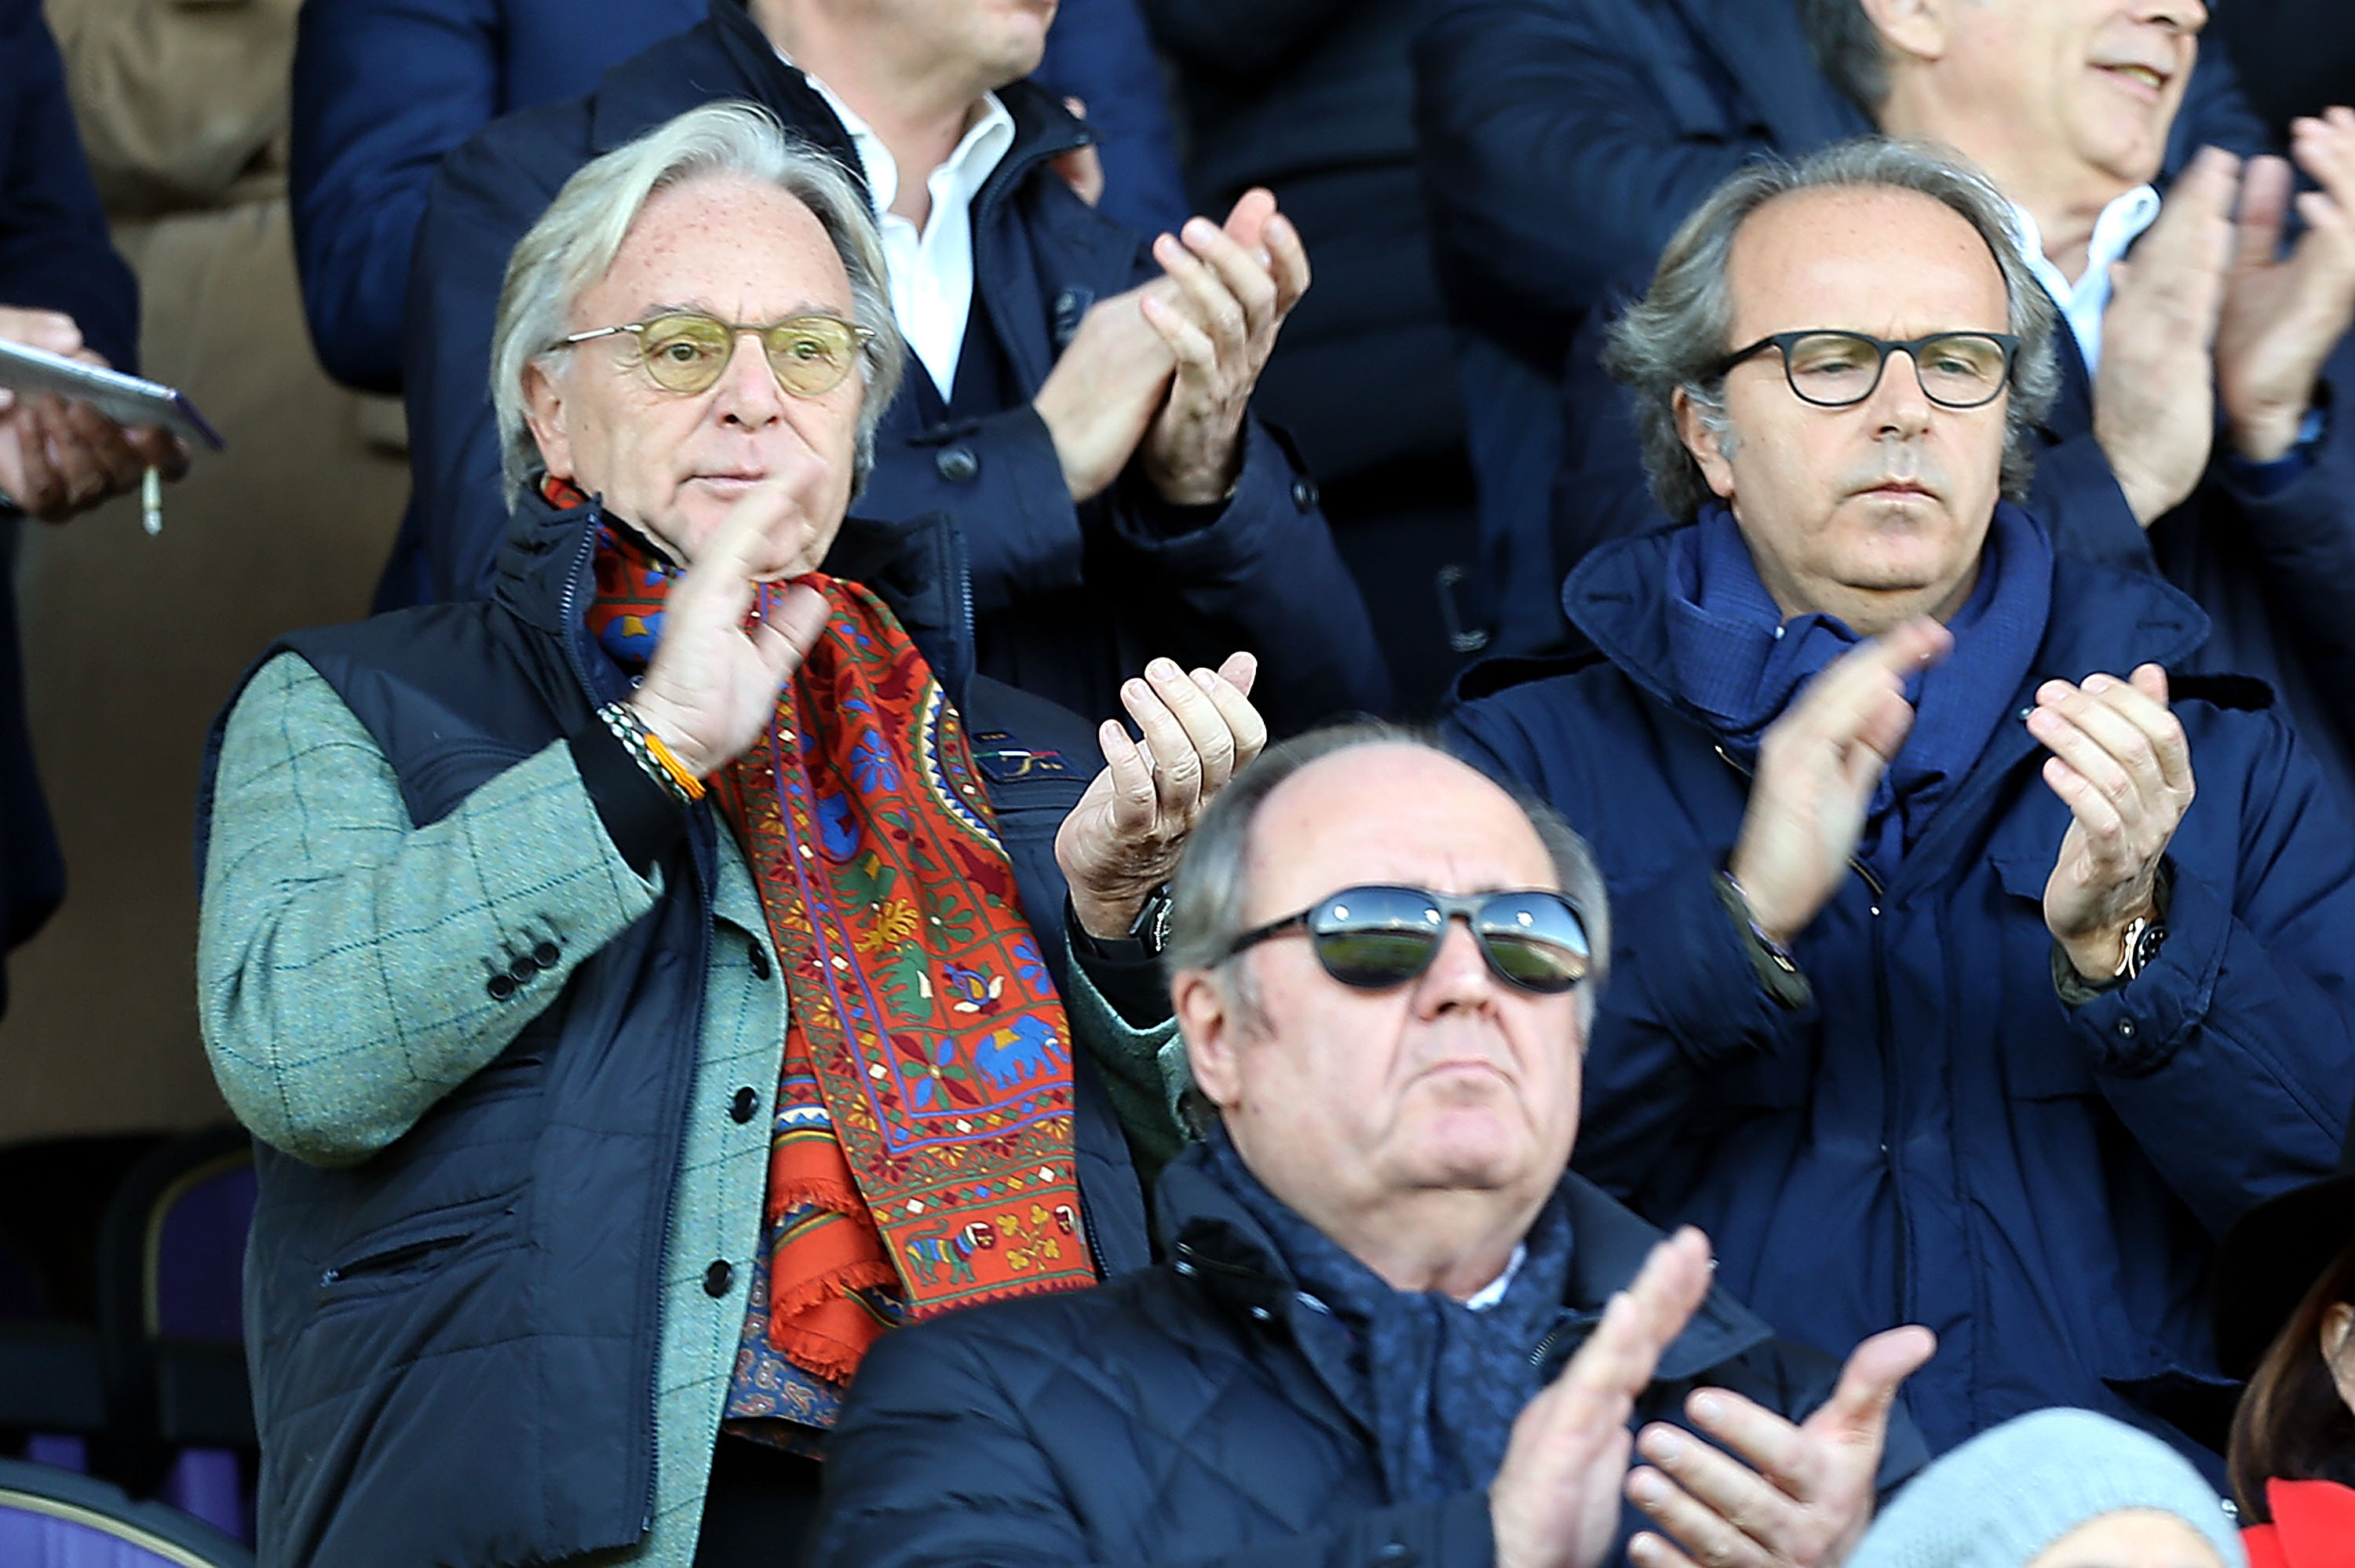 FLORENCE, ITALY - NOVEMBER 22: Diego Della Valle (L) and Andrea Della Valle during the French anthem during the Serie A match between ACF Fiorentina and Empoli FC at Stadio Artemio Franchi on November 22, 2015 in Florence, Italy.  (Photo by Gabriele Maltinti/Getty Images)